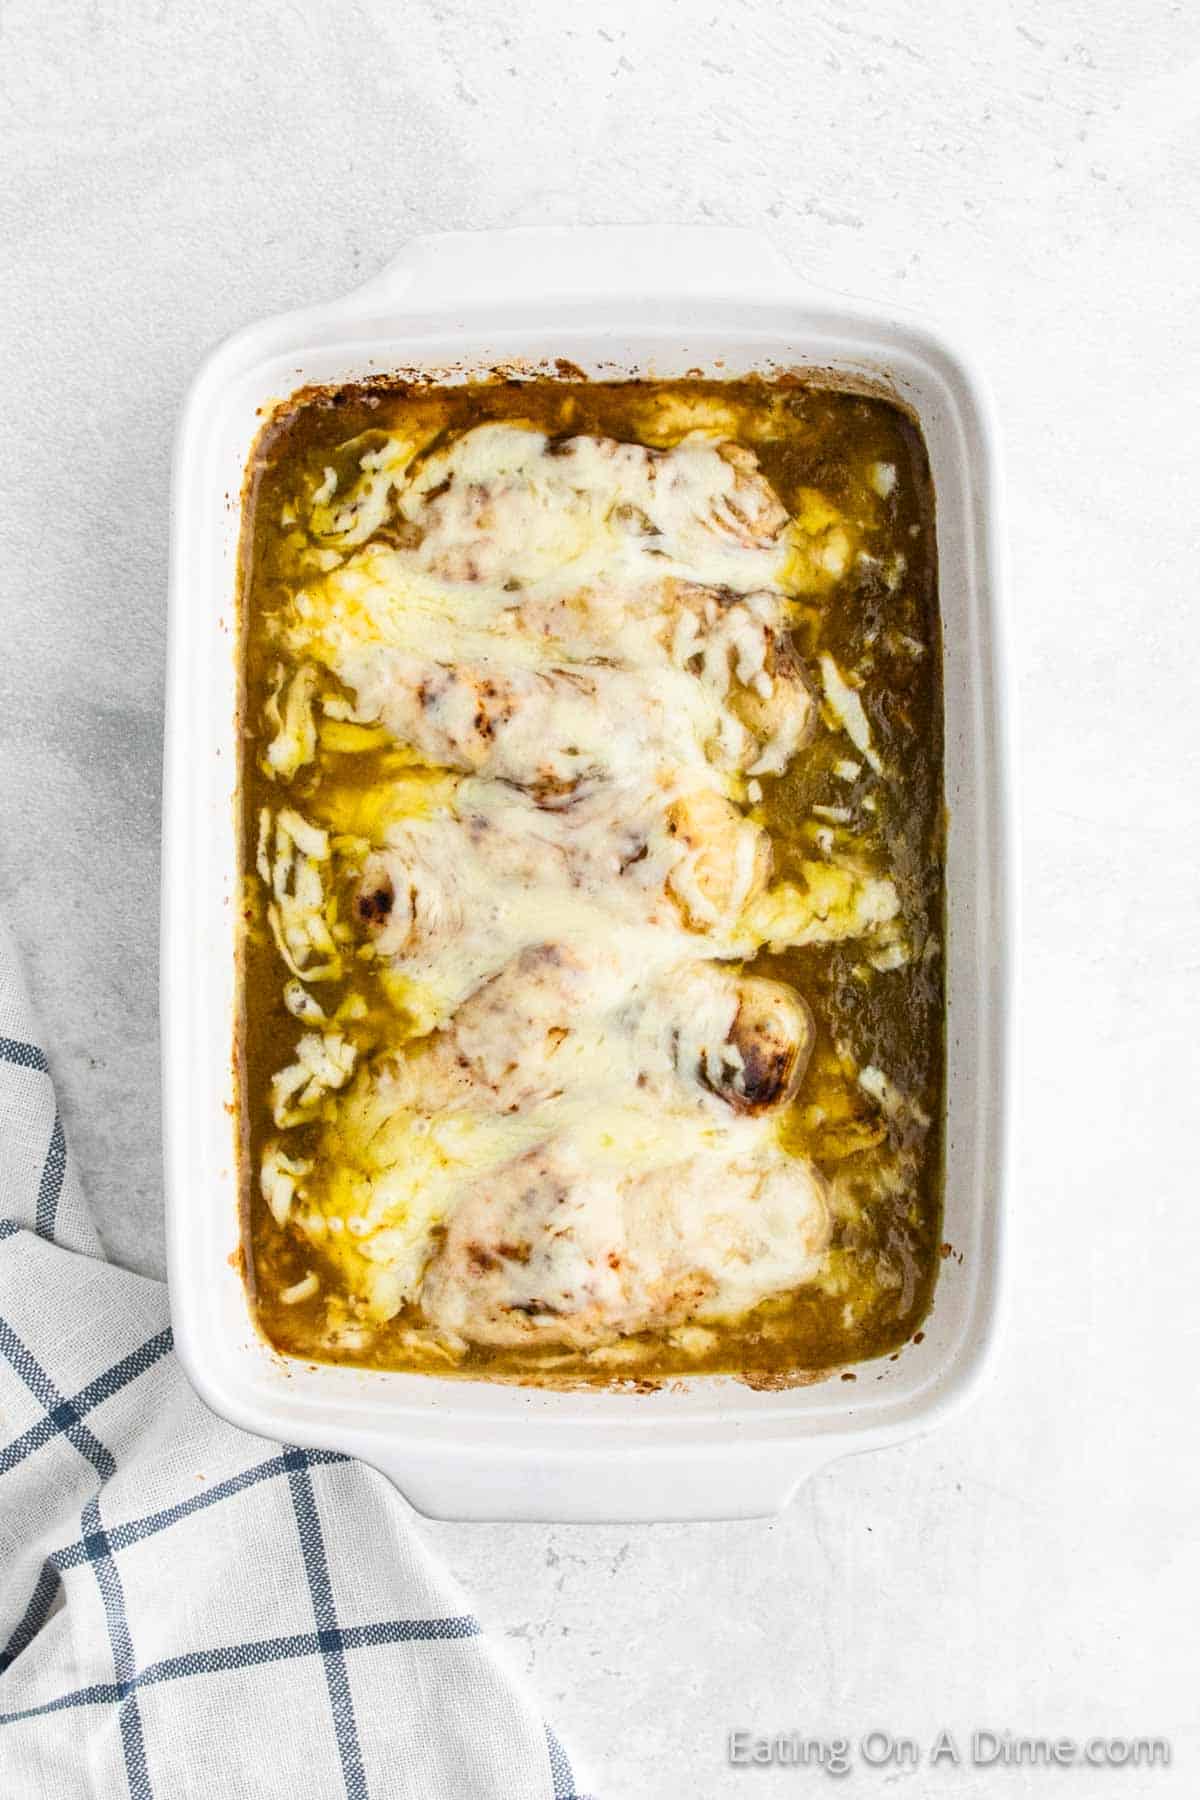 Baked chicken enchiladas in a baking dish topped with melted cheese